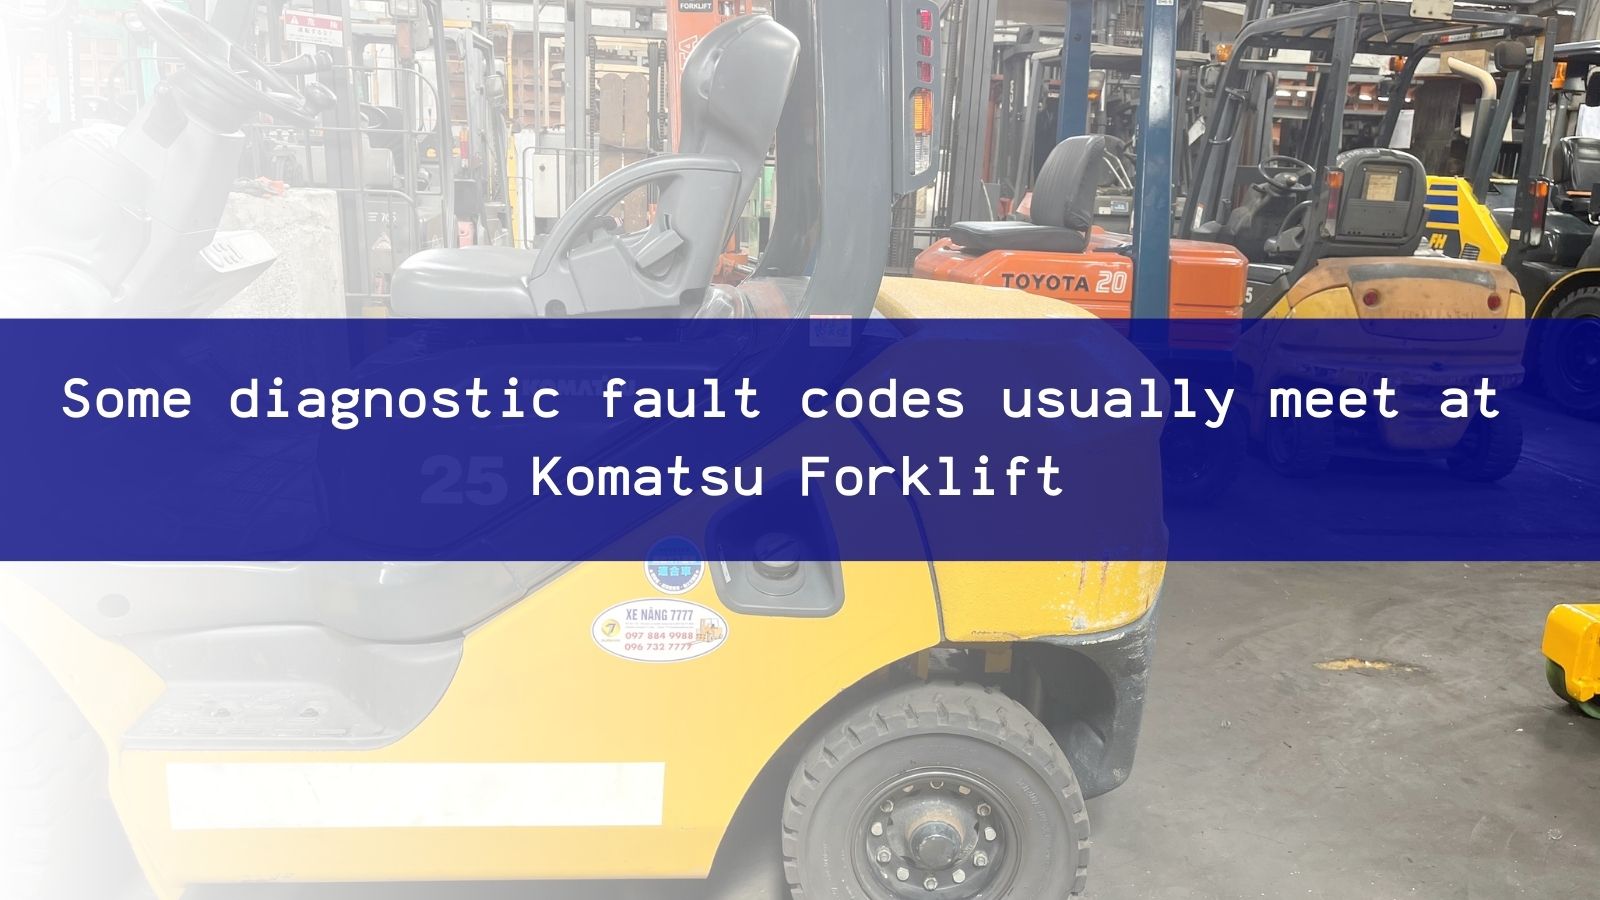 Some diagnostic fault codes usually meet at Komatsu Forklift